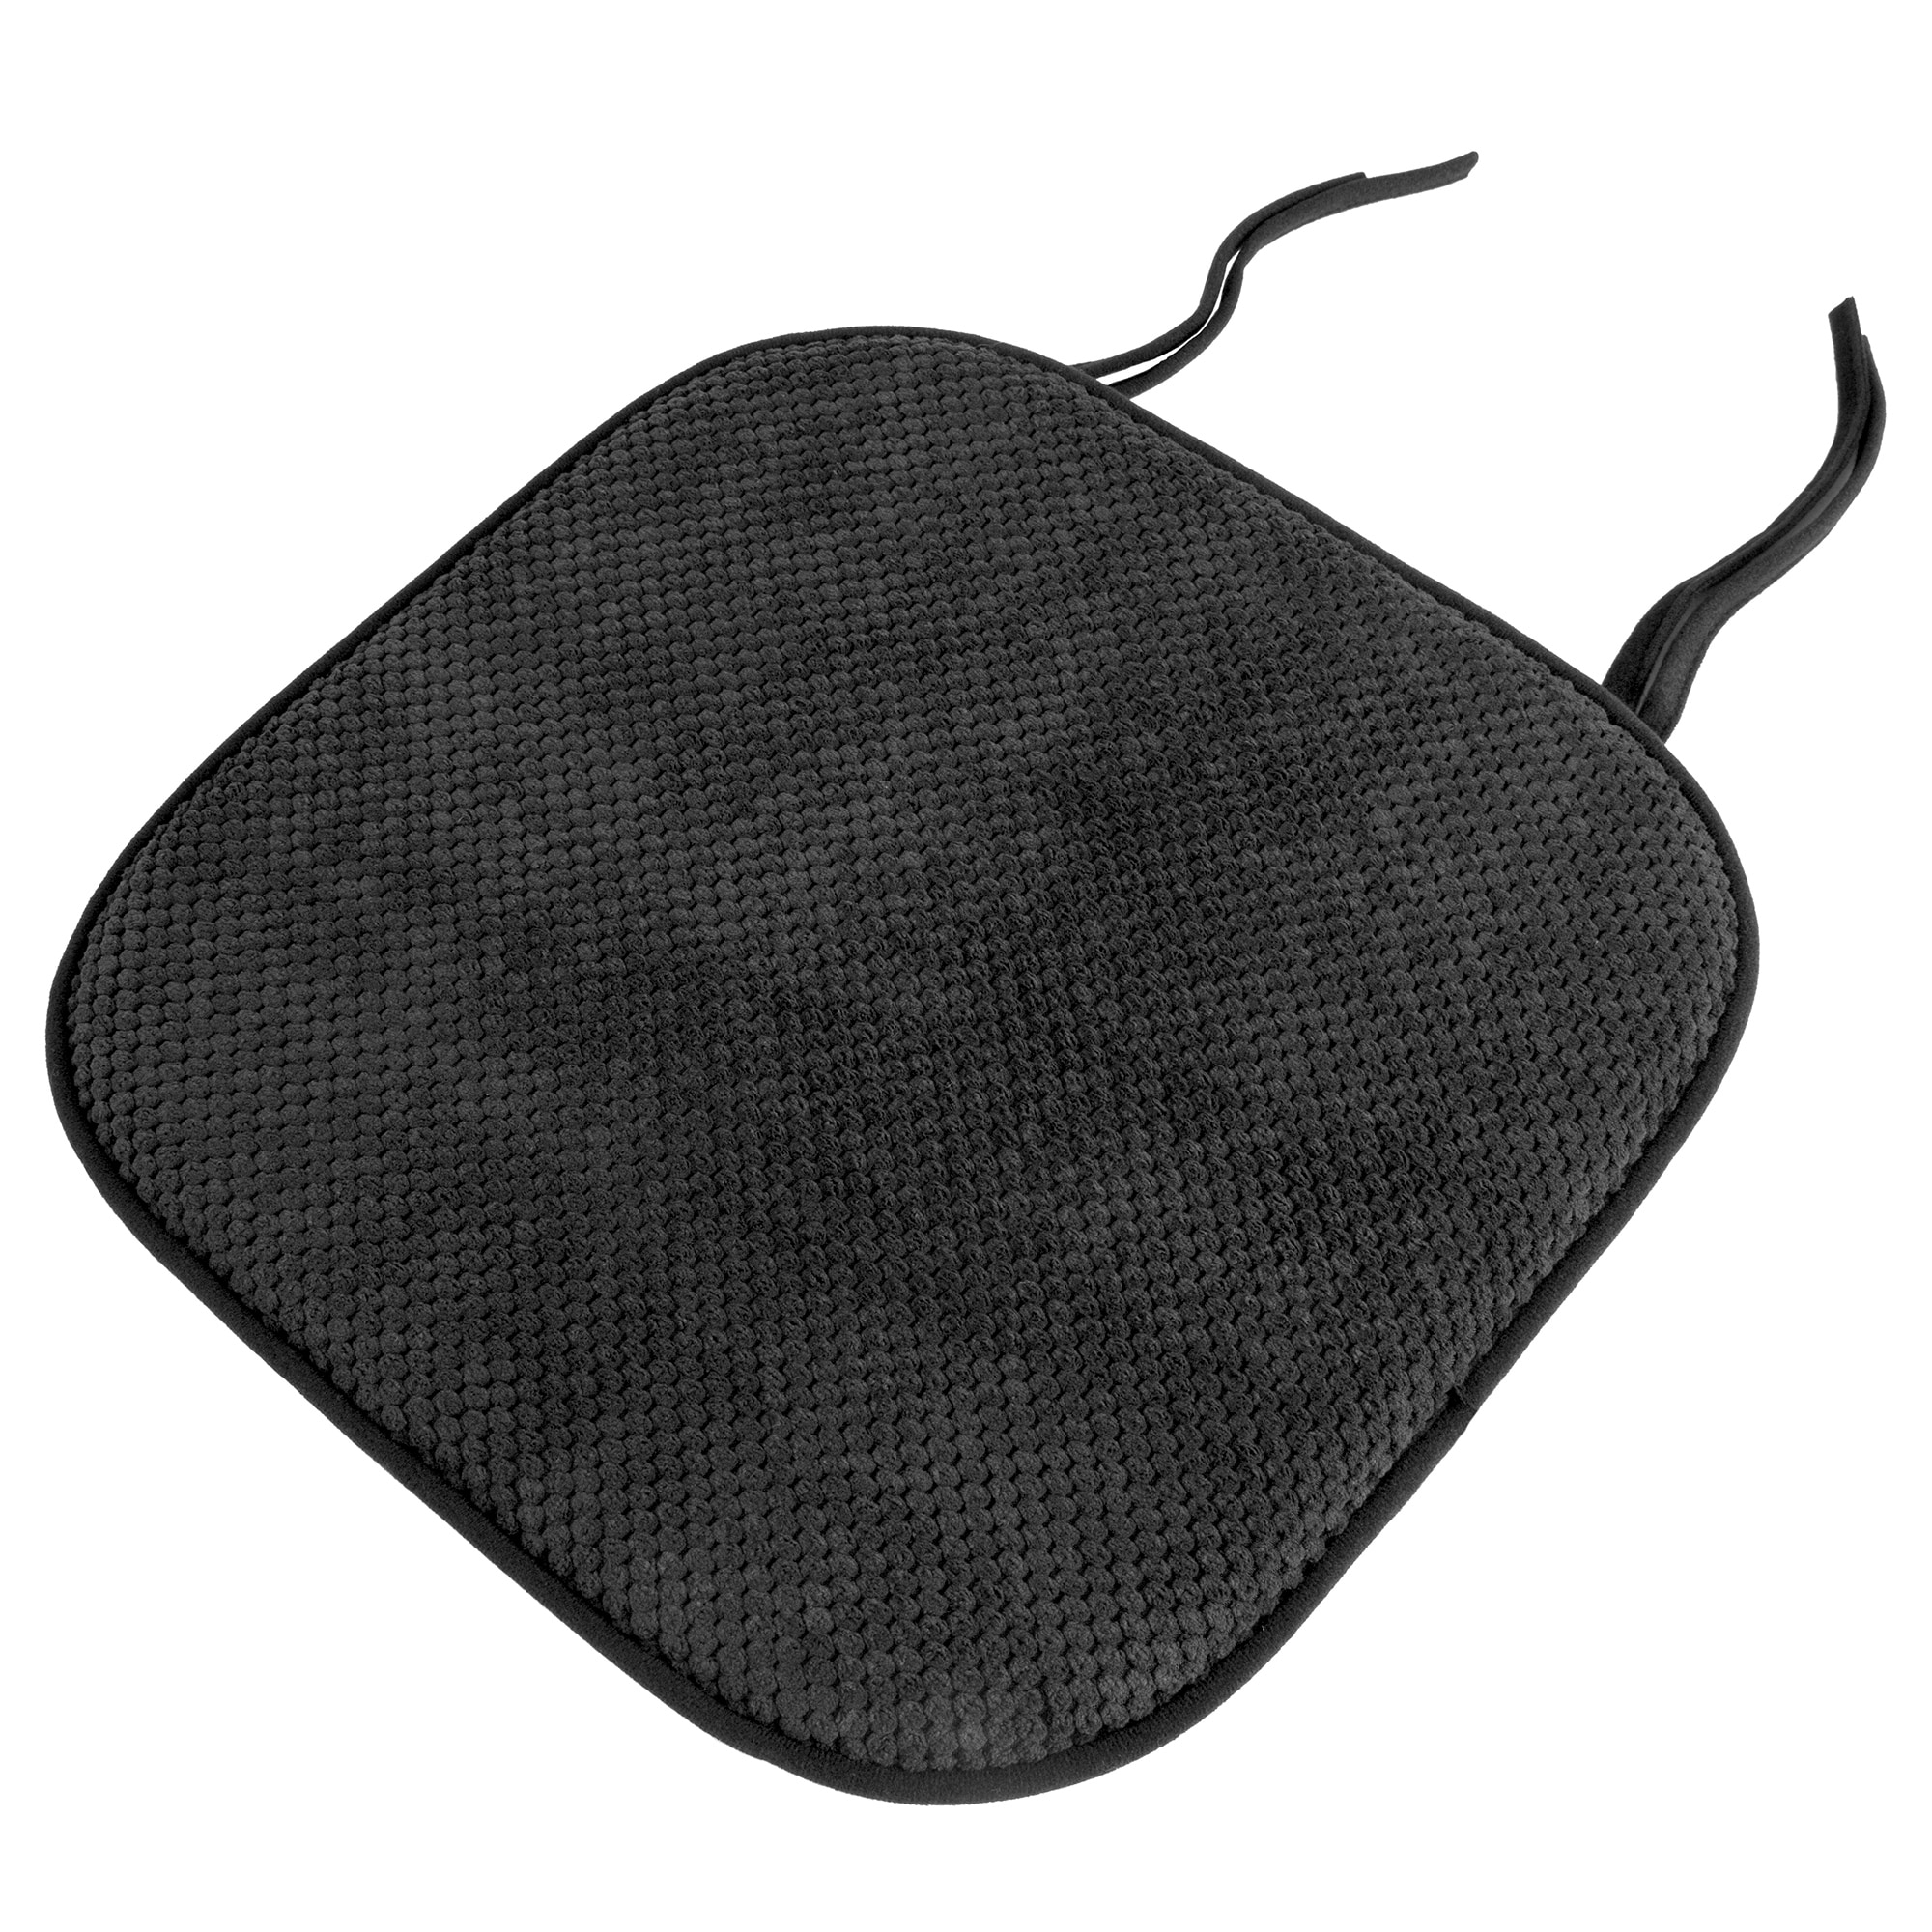 Memory Foam Chair Cushion - Great for Dining, Kitchen, and Desk Chairs -  Machine Washable Pad with Ties and Nonslip Back by Lavish Home (Platinum)